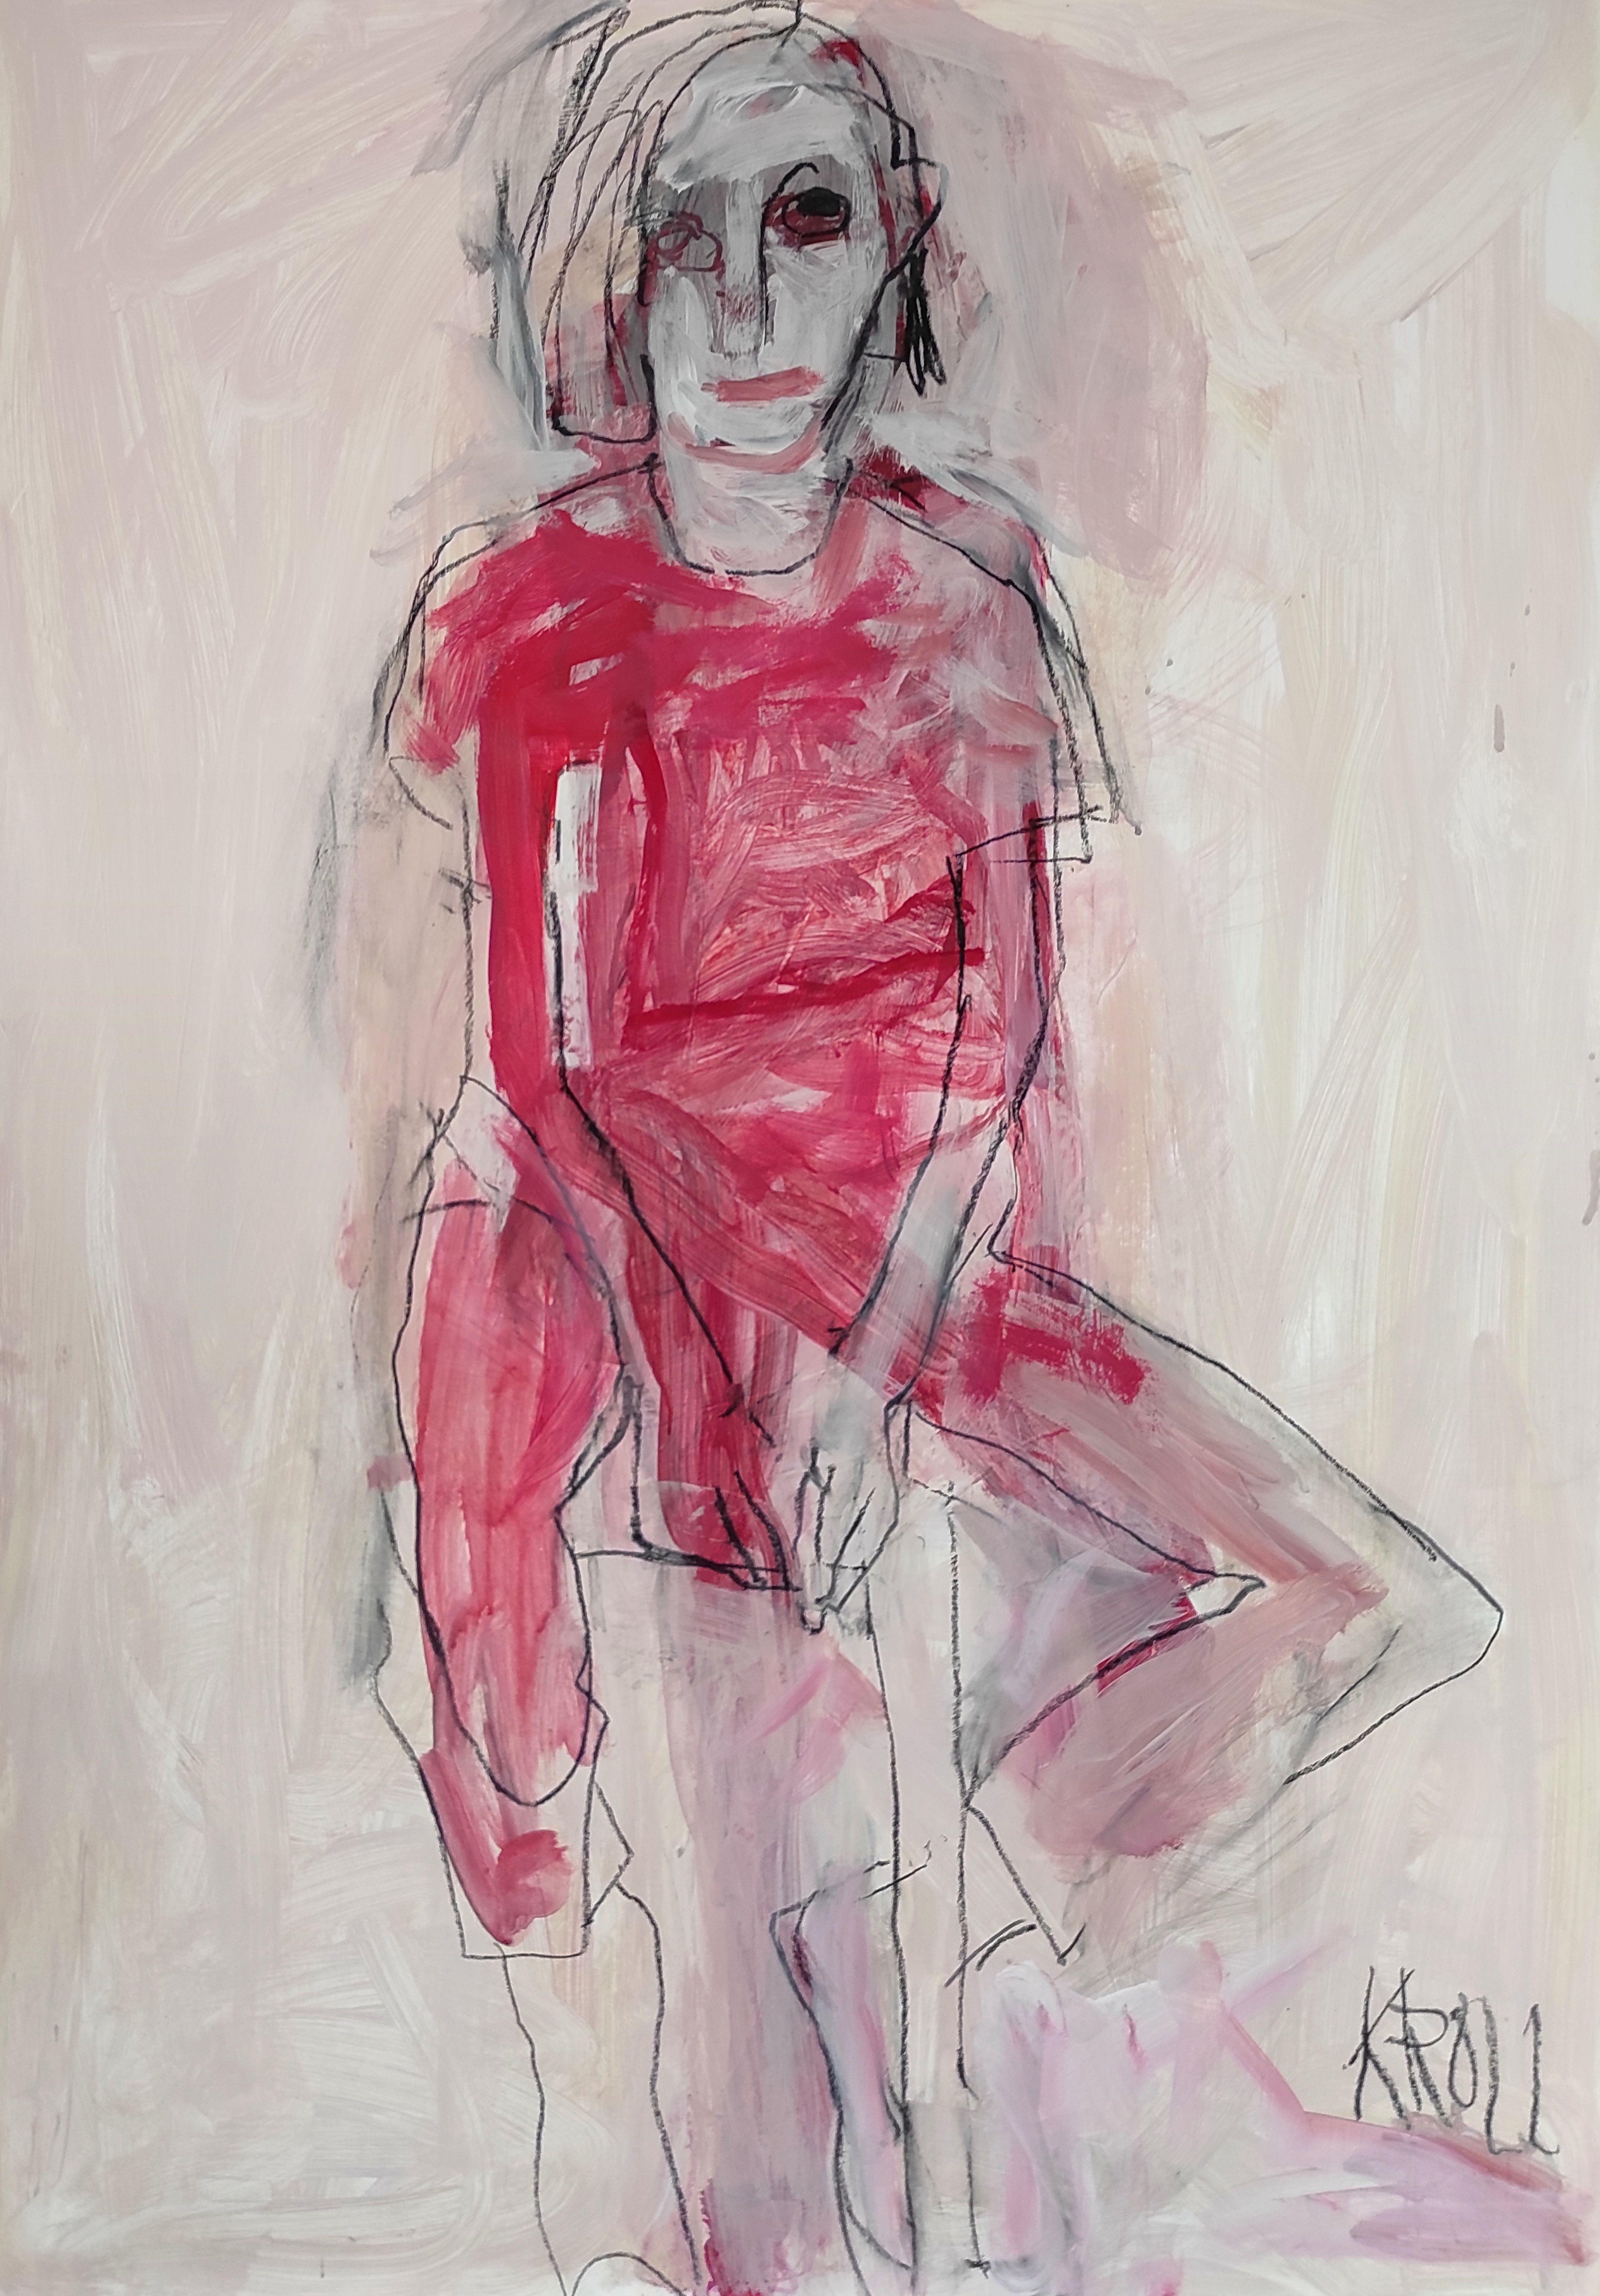 Seated woman in red dress, Drawing, Pencil/Colored Pencil on Paper - Art by Barbara Kroll